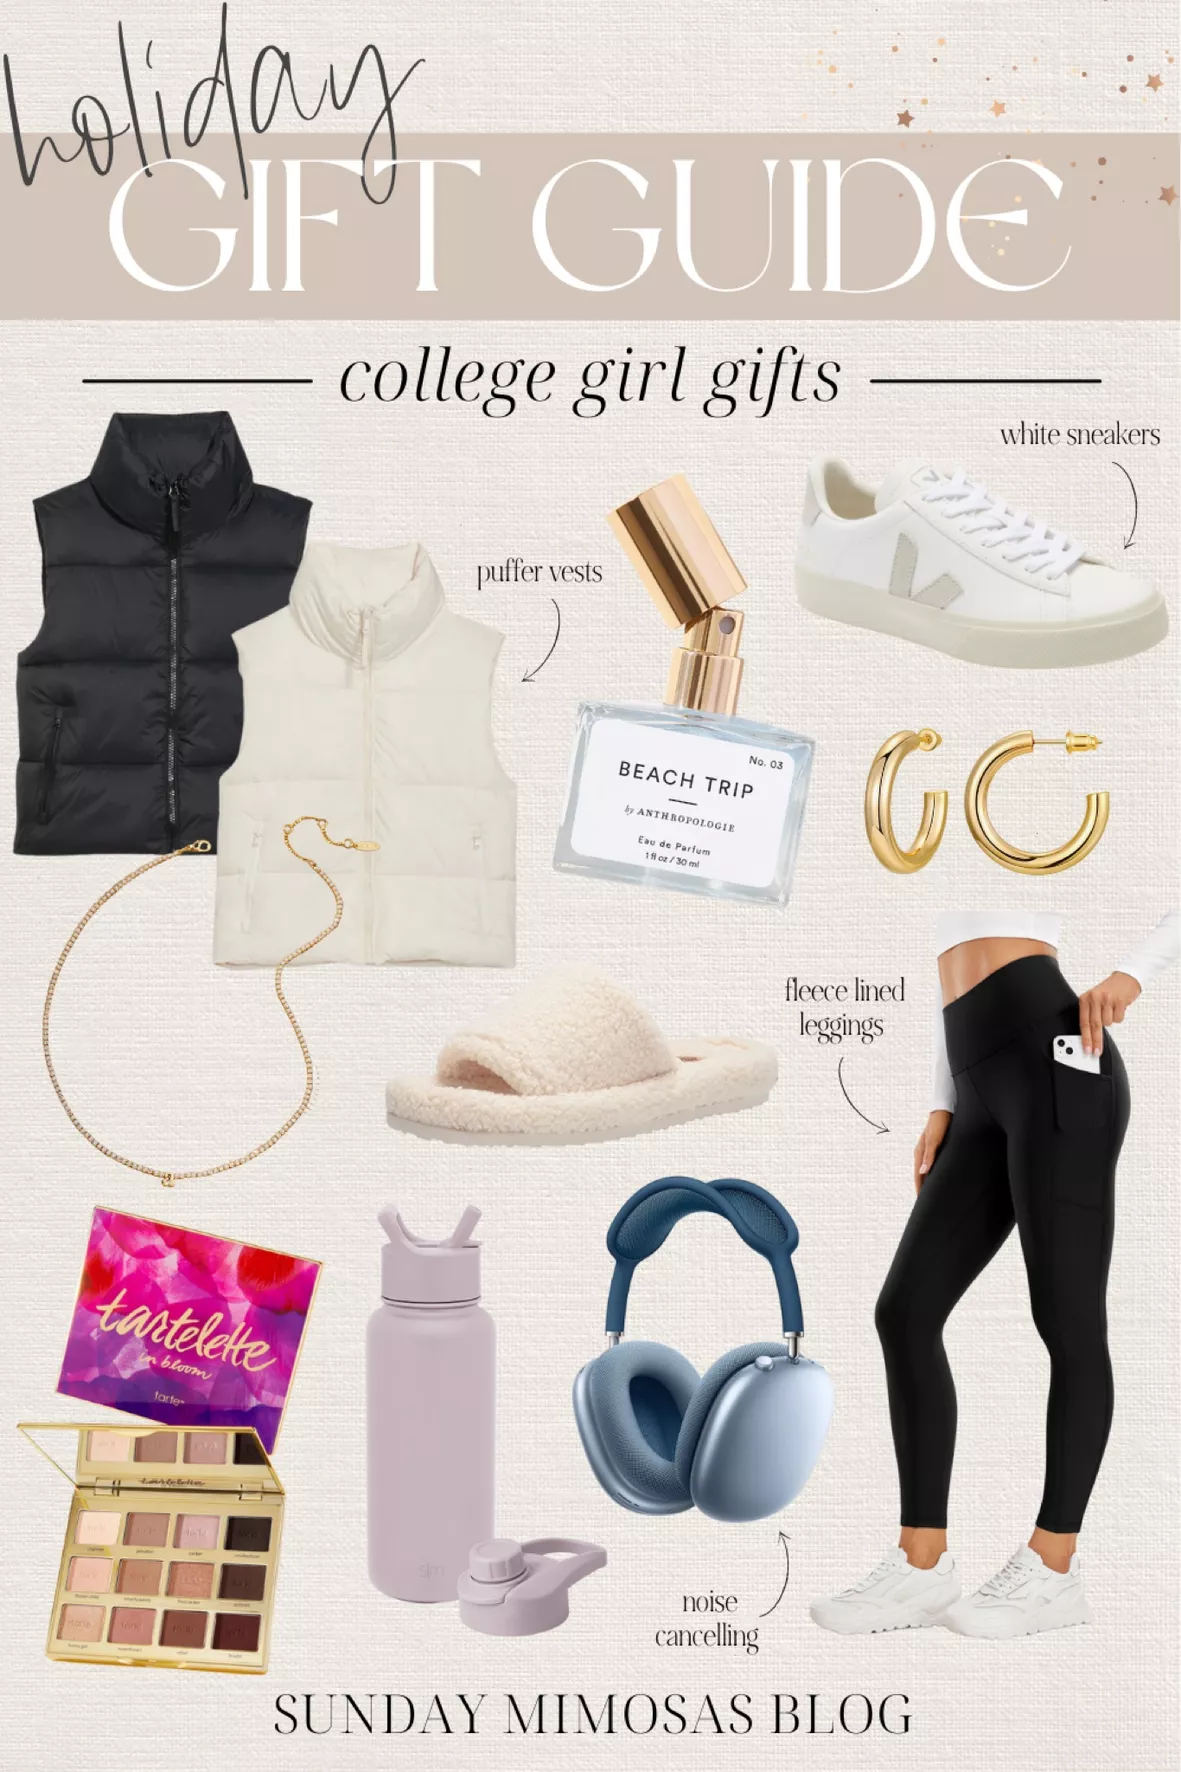 Gifts for Her – CRZ YOGA